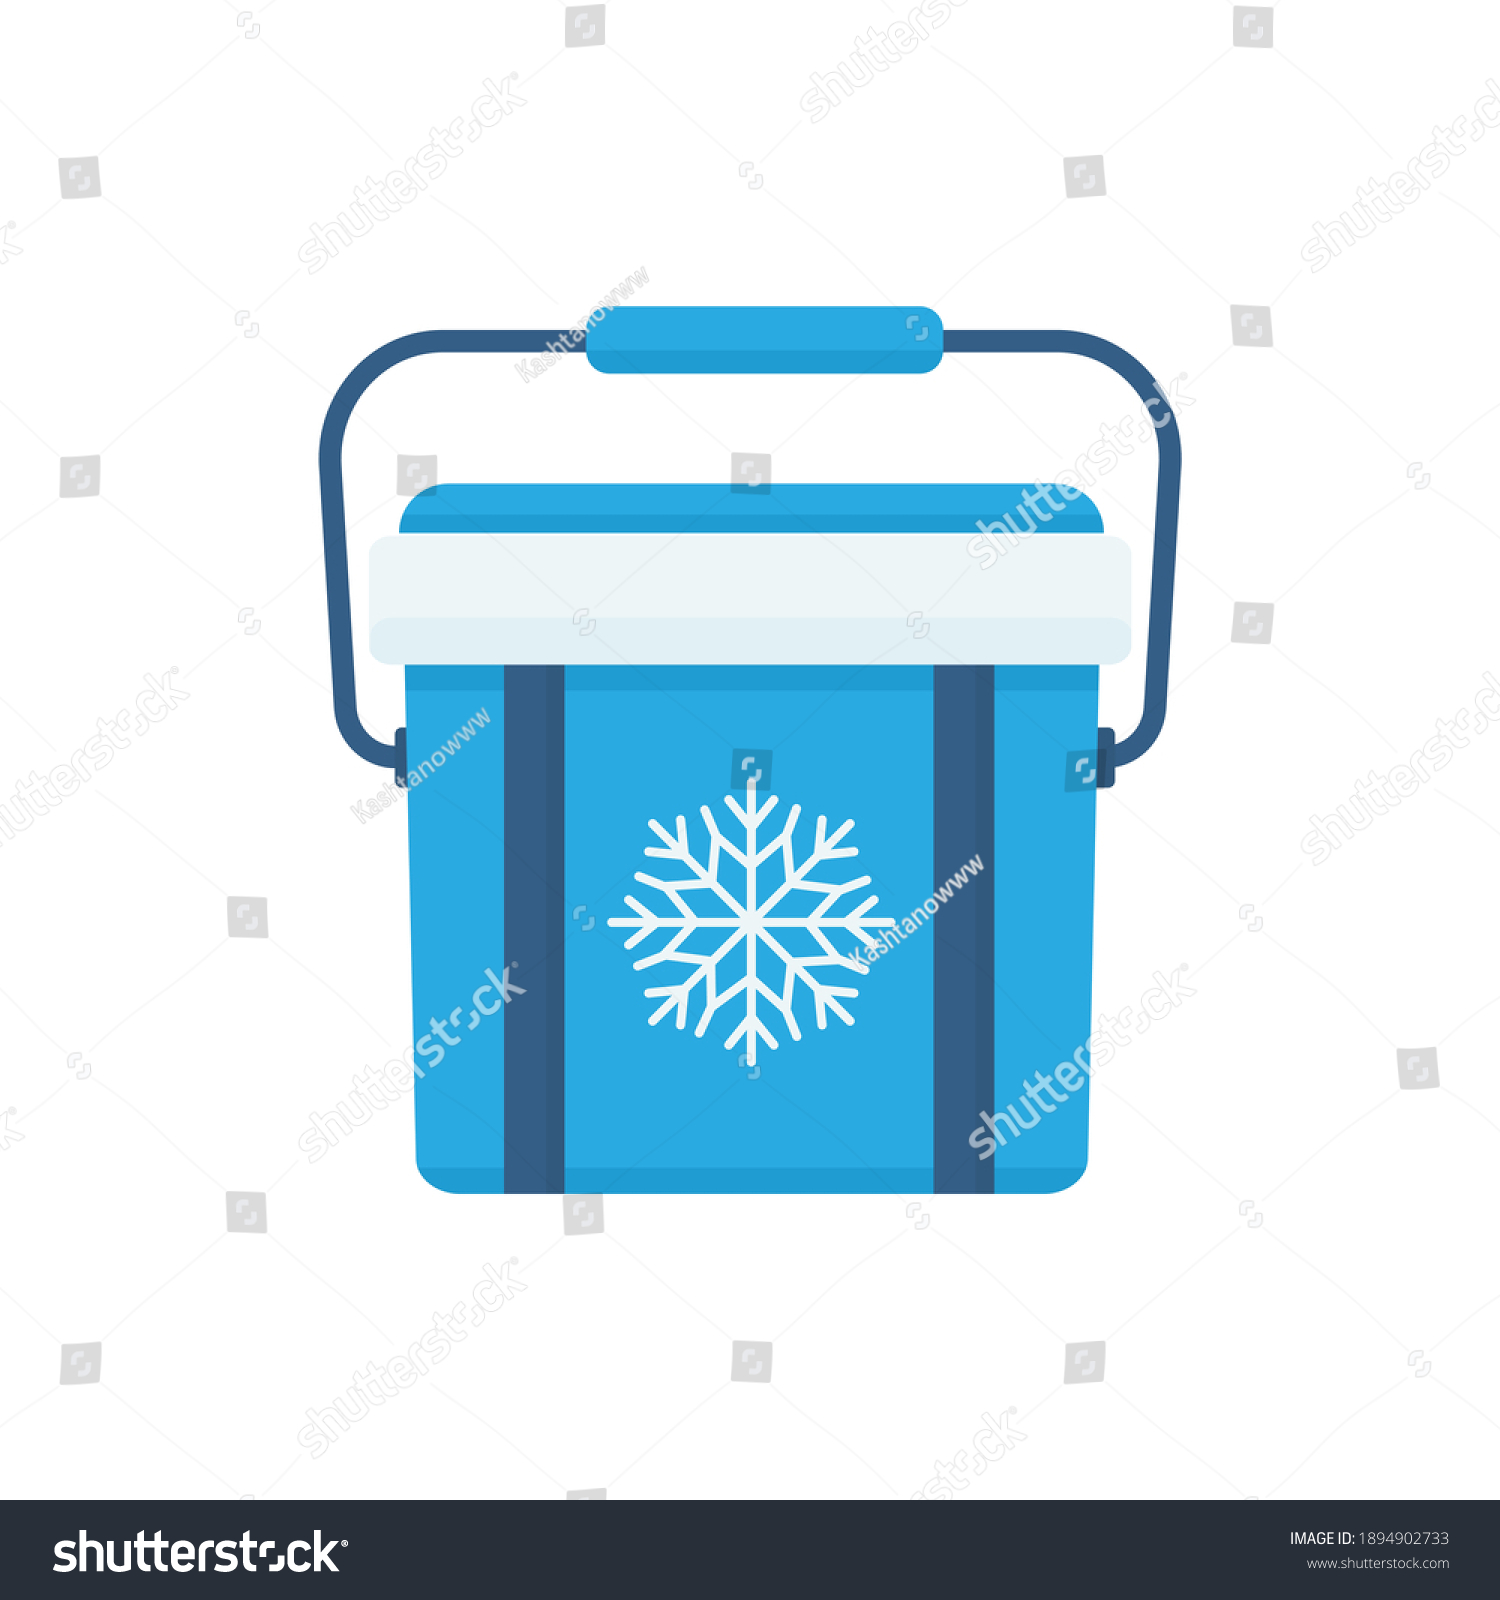 SVG of Ice cooler or freezer box, icon isolated on white background. Icebox for picnic, travel, beer, drink and delivery food. Flat design. Vector illustration. svg